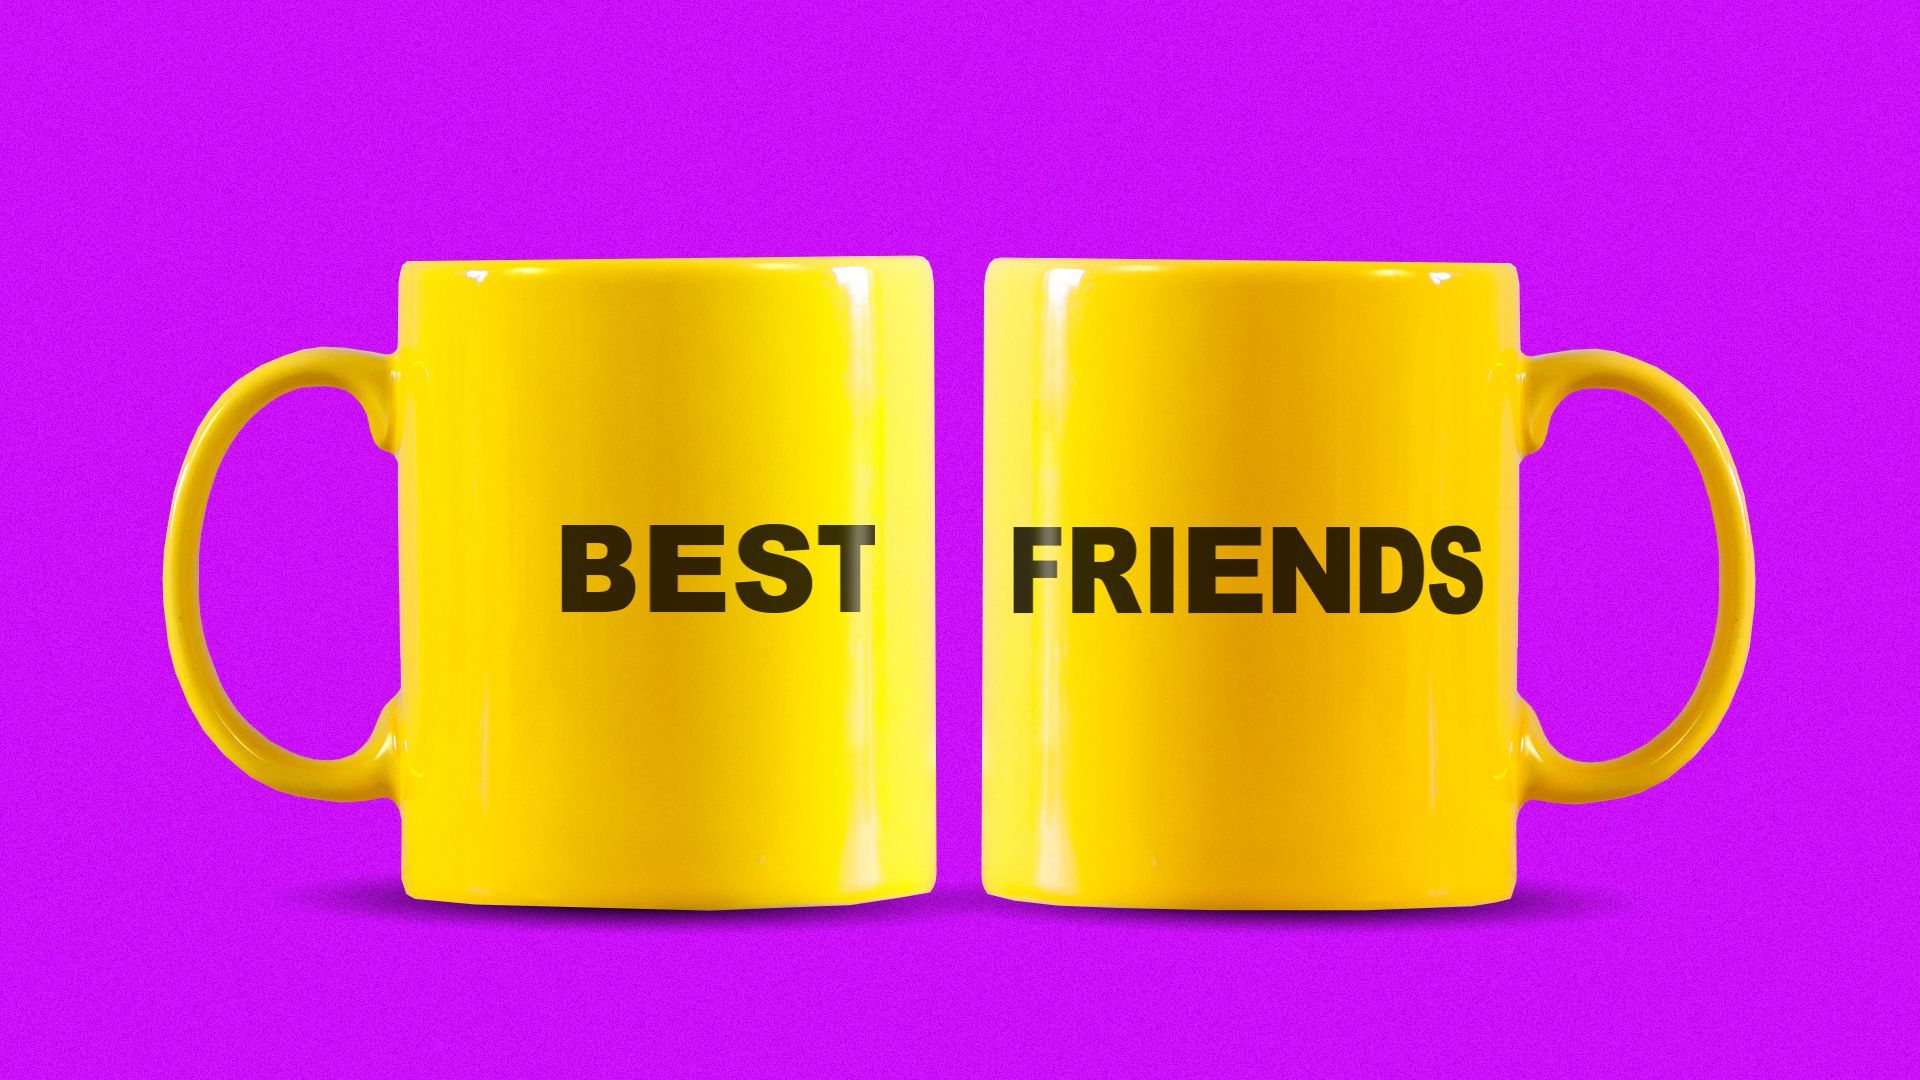 Illustration of two mugs, one with the word "best" and the other with the word "friends" on their sides